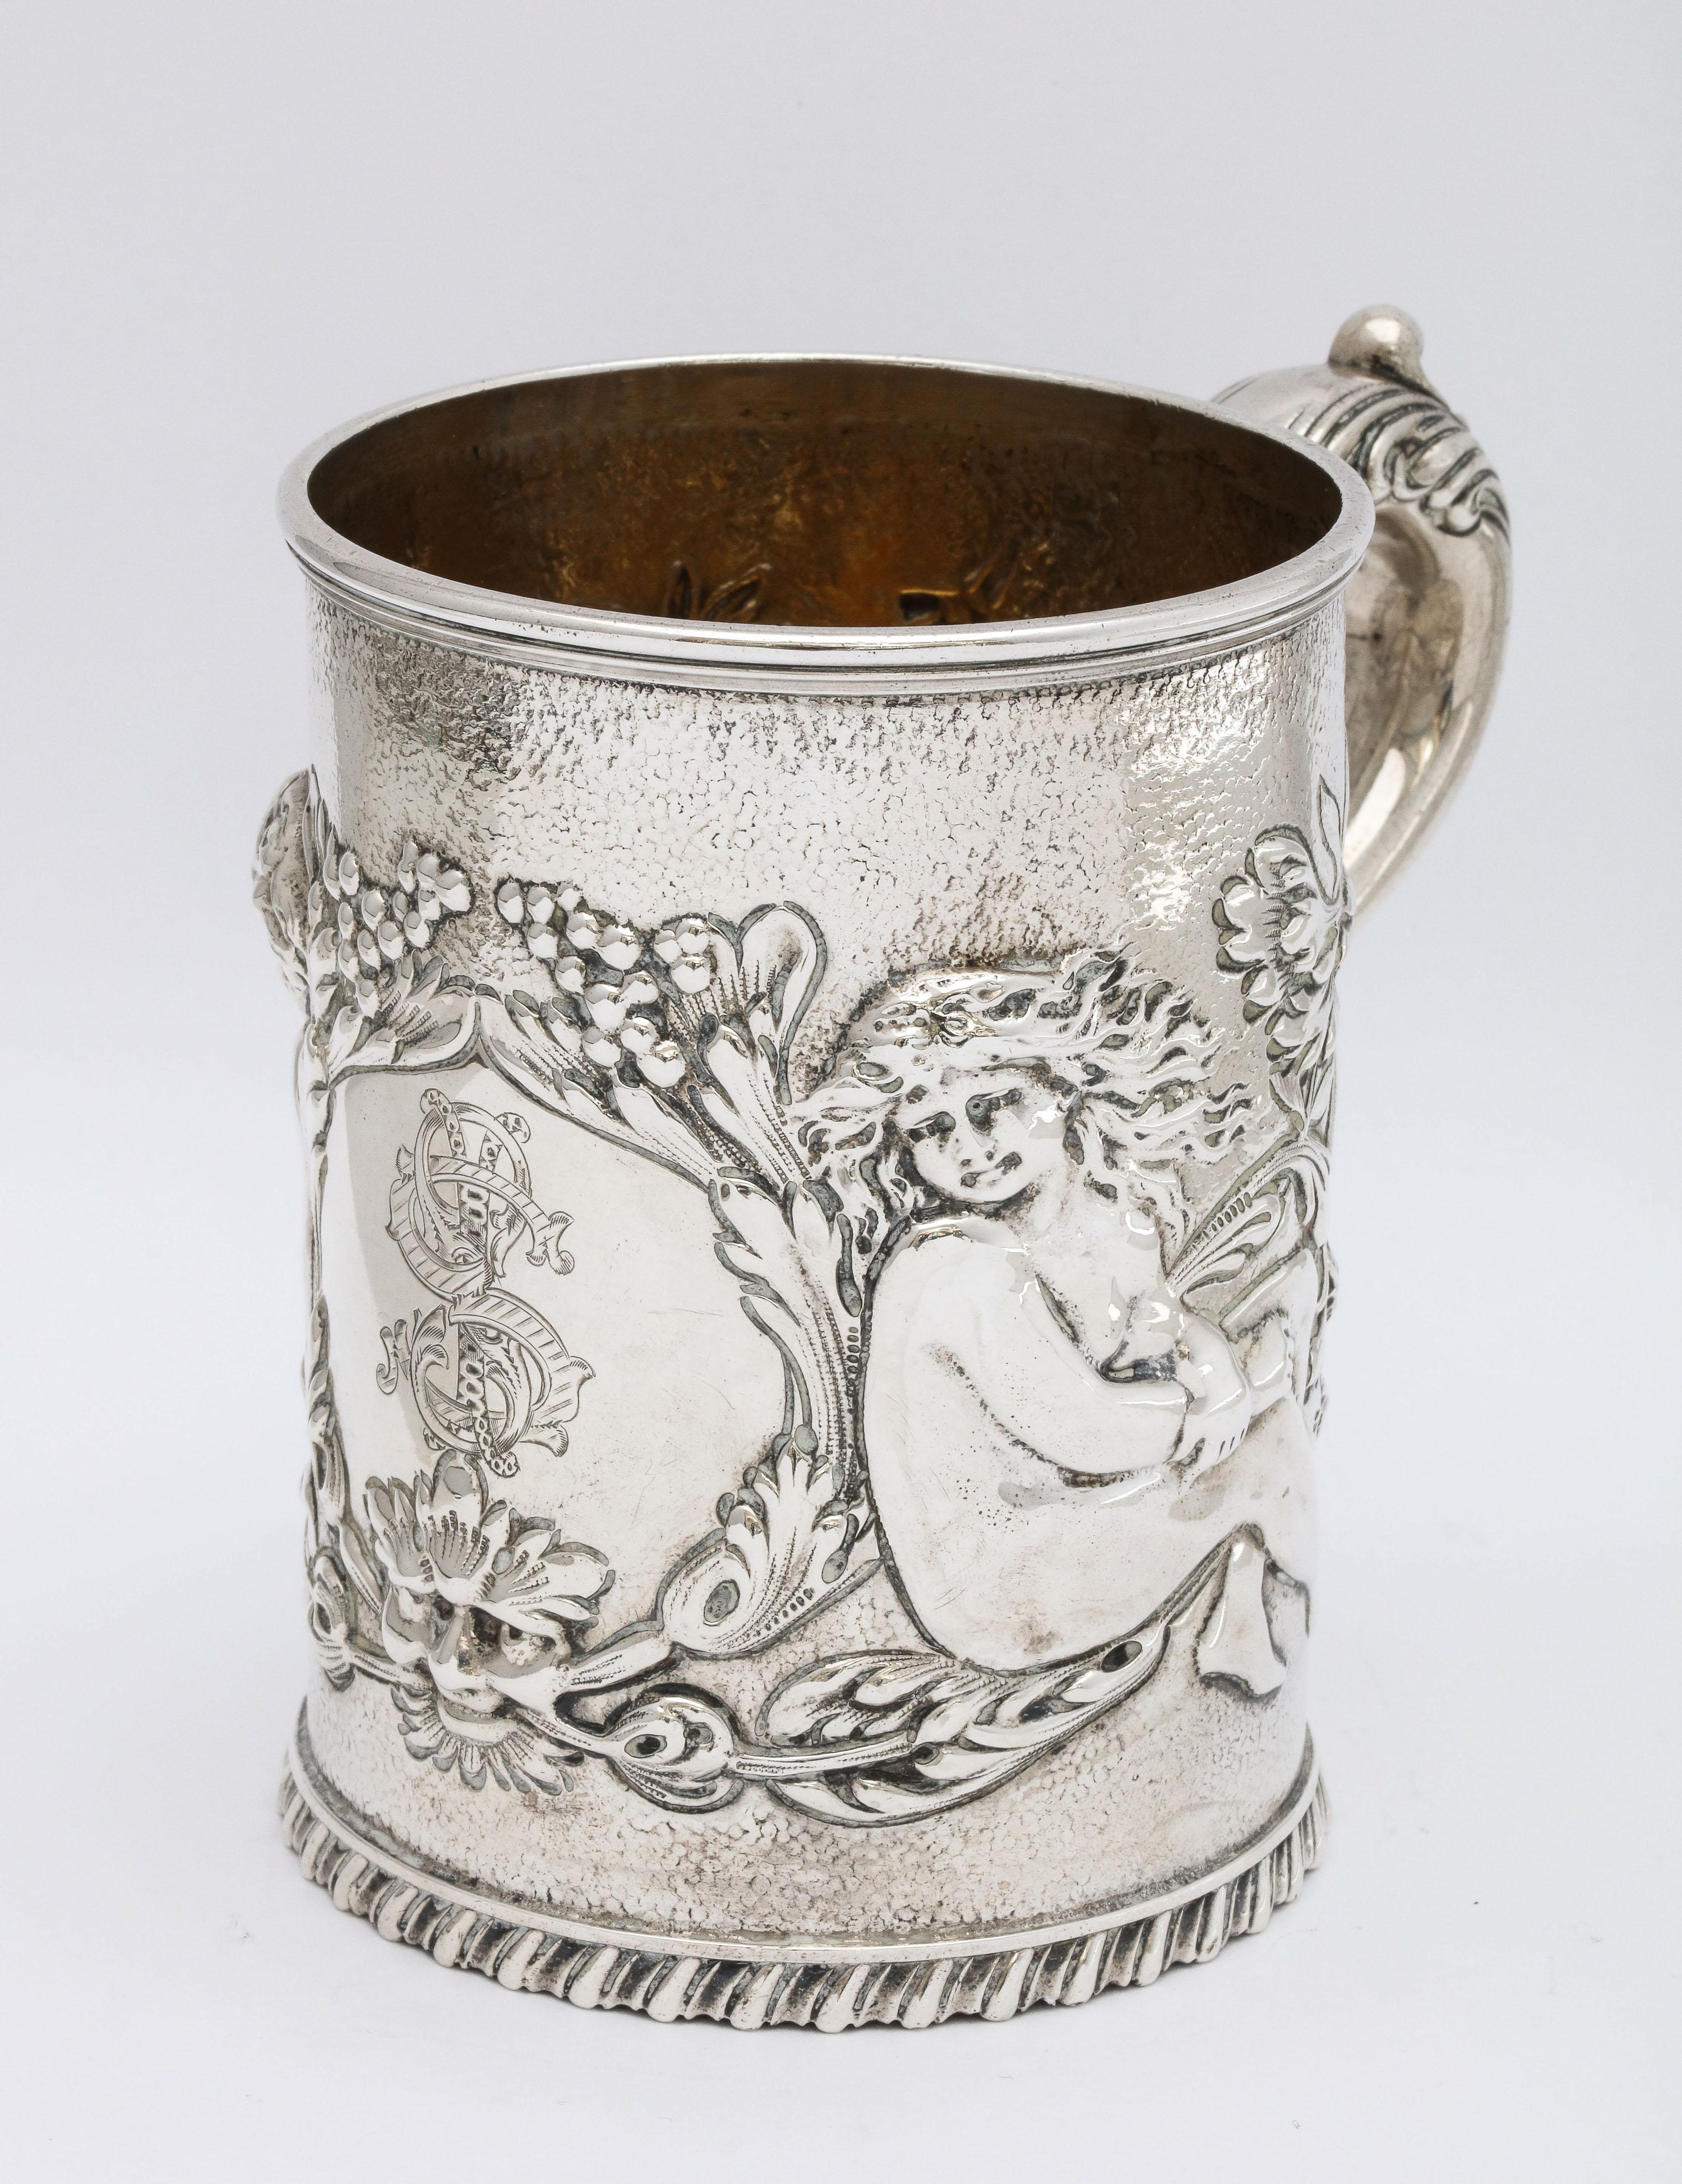 Neoclassical Sterling Silver Mug/Cup by The Whiting Mfg. Co. In Good Condition For Sale In New York, NY